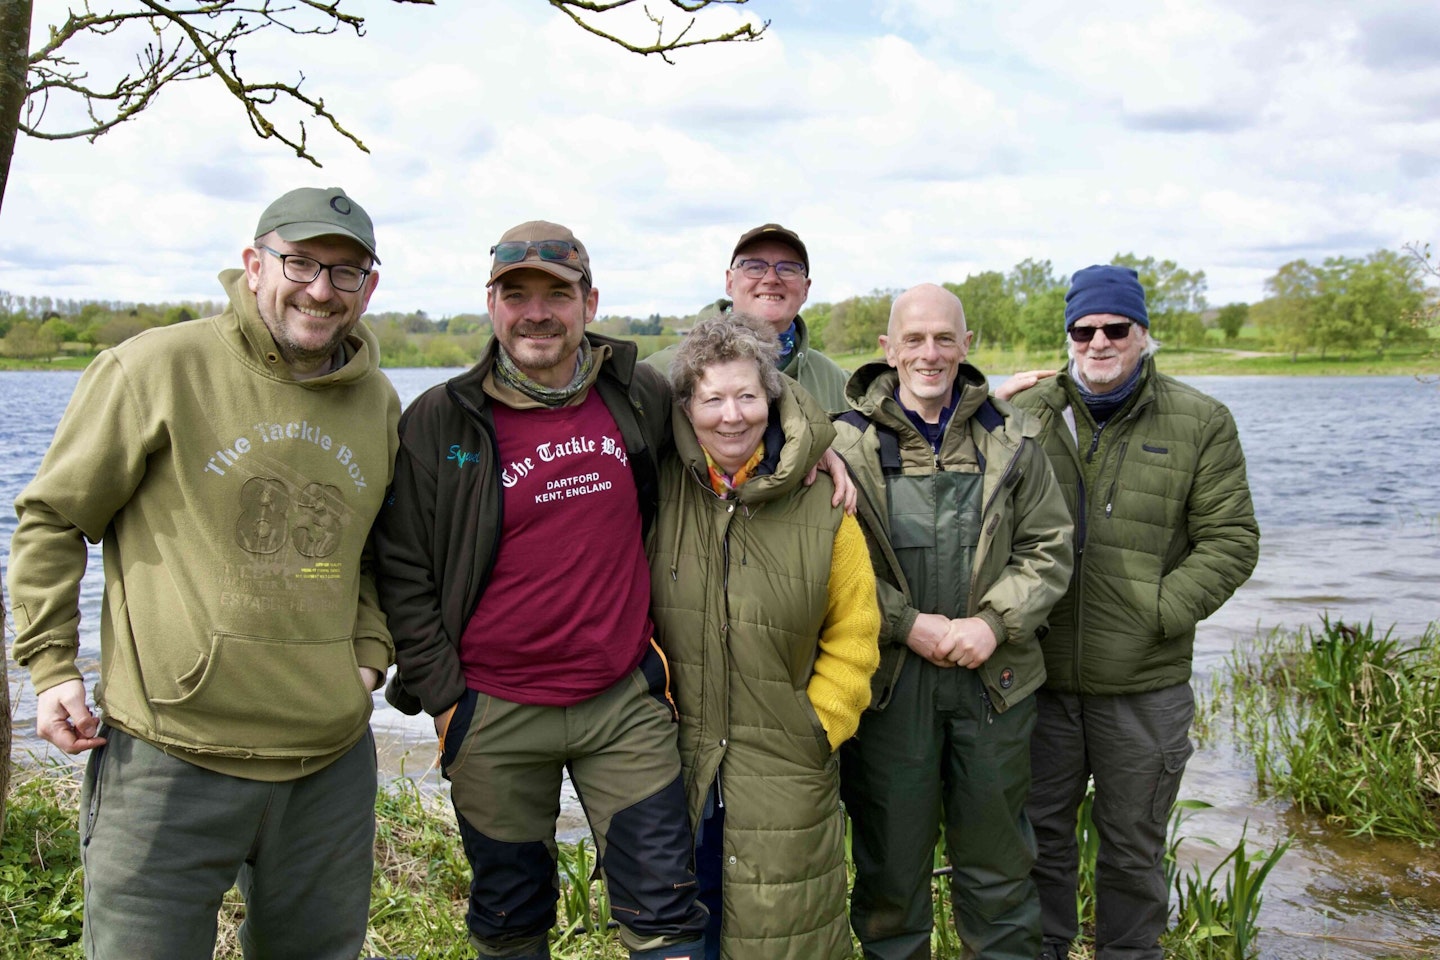 Fishing and friendship is what the Tenchfishers are all about.